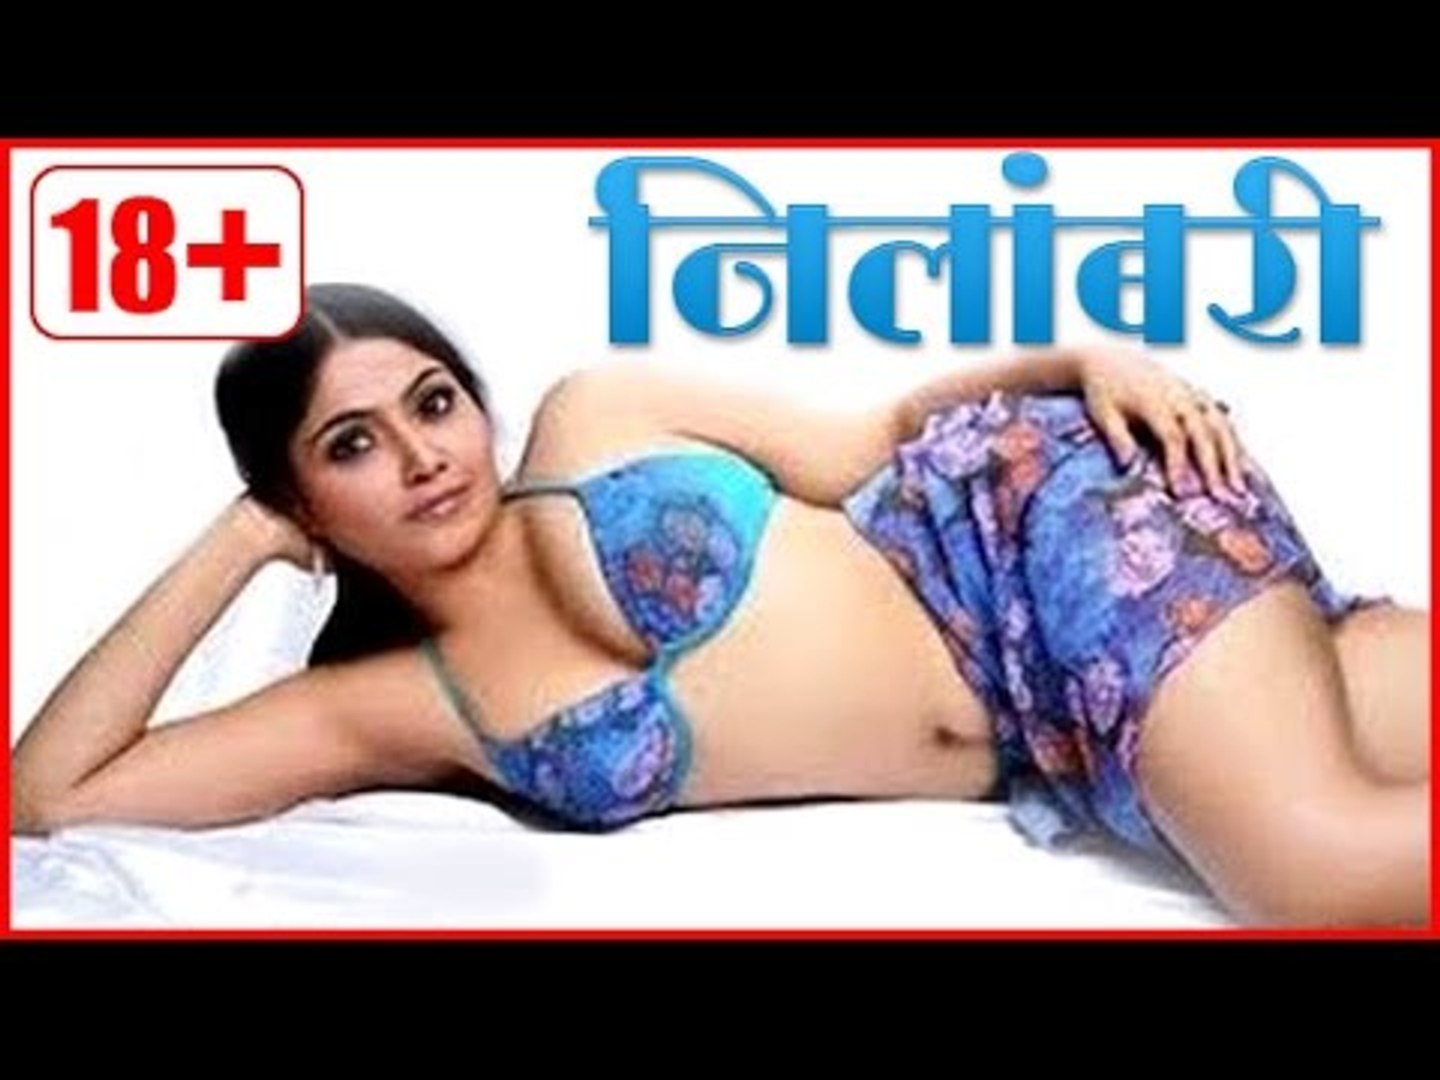 anand sasi recommends indian sexy movie download pic